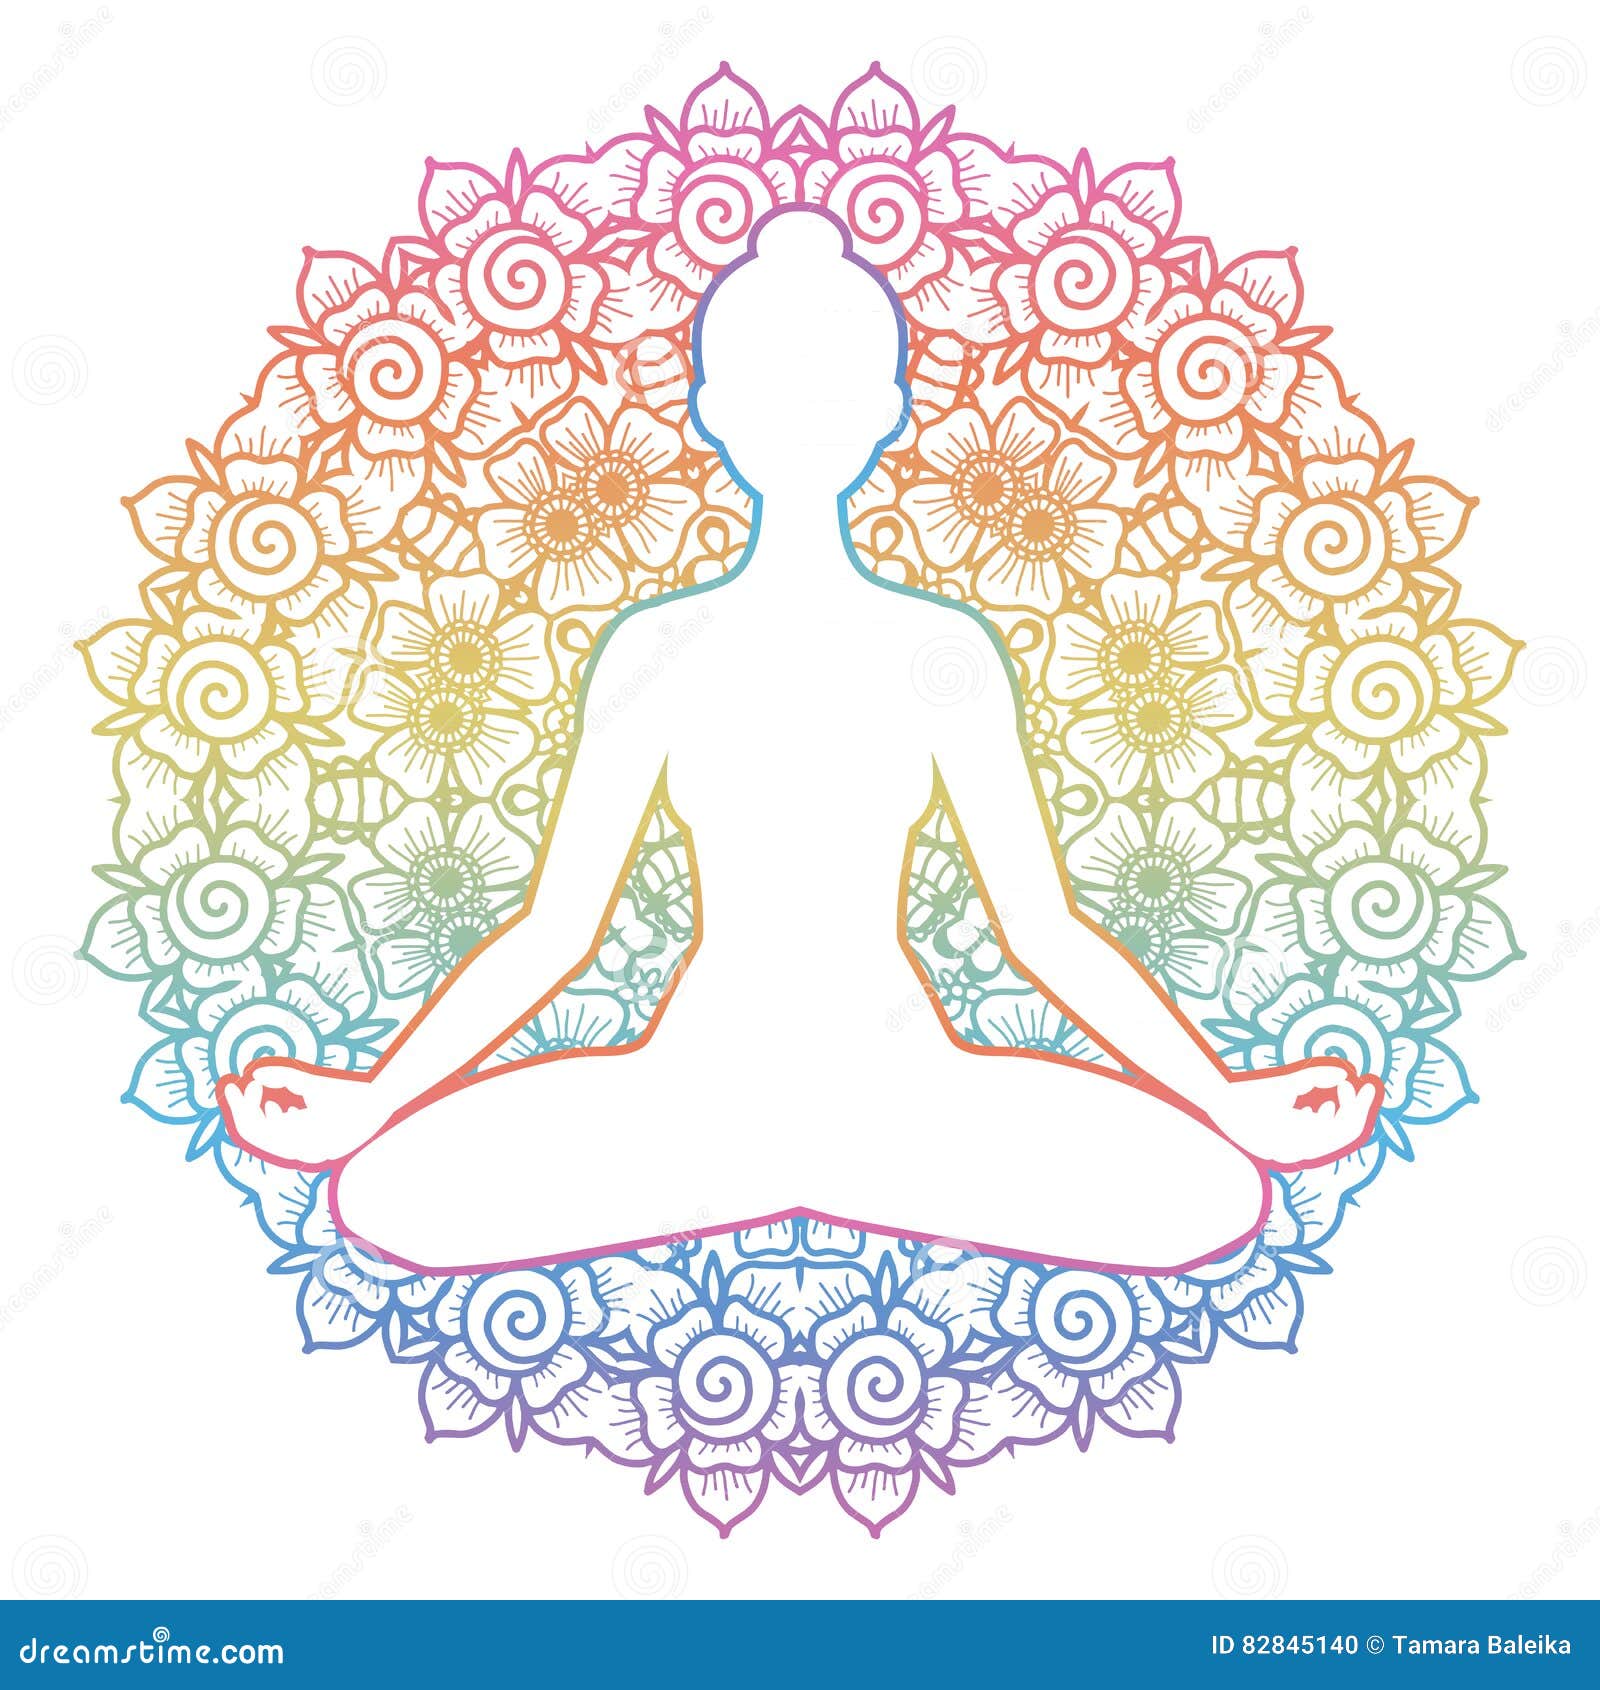 Padmasana: How to Do Your First (Pain-Free) Lotus Pose – So We Flow...